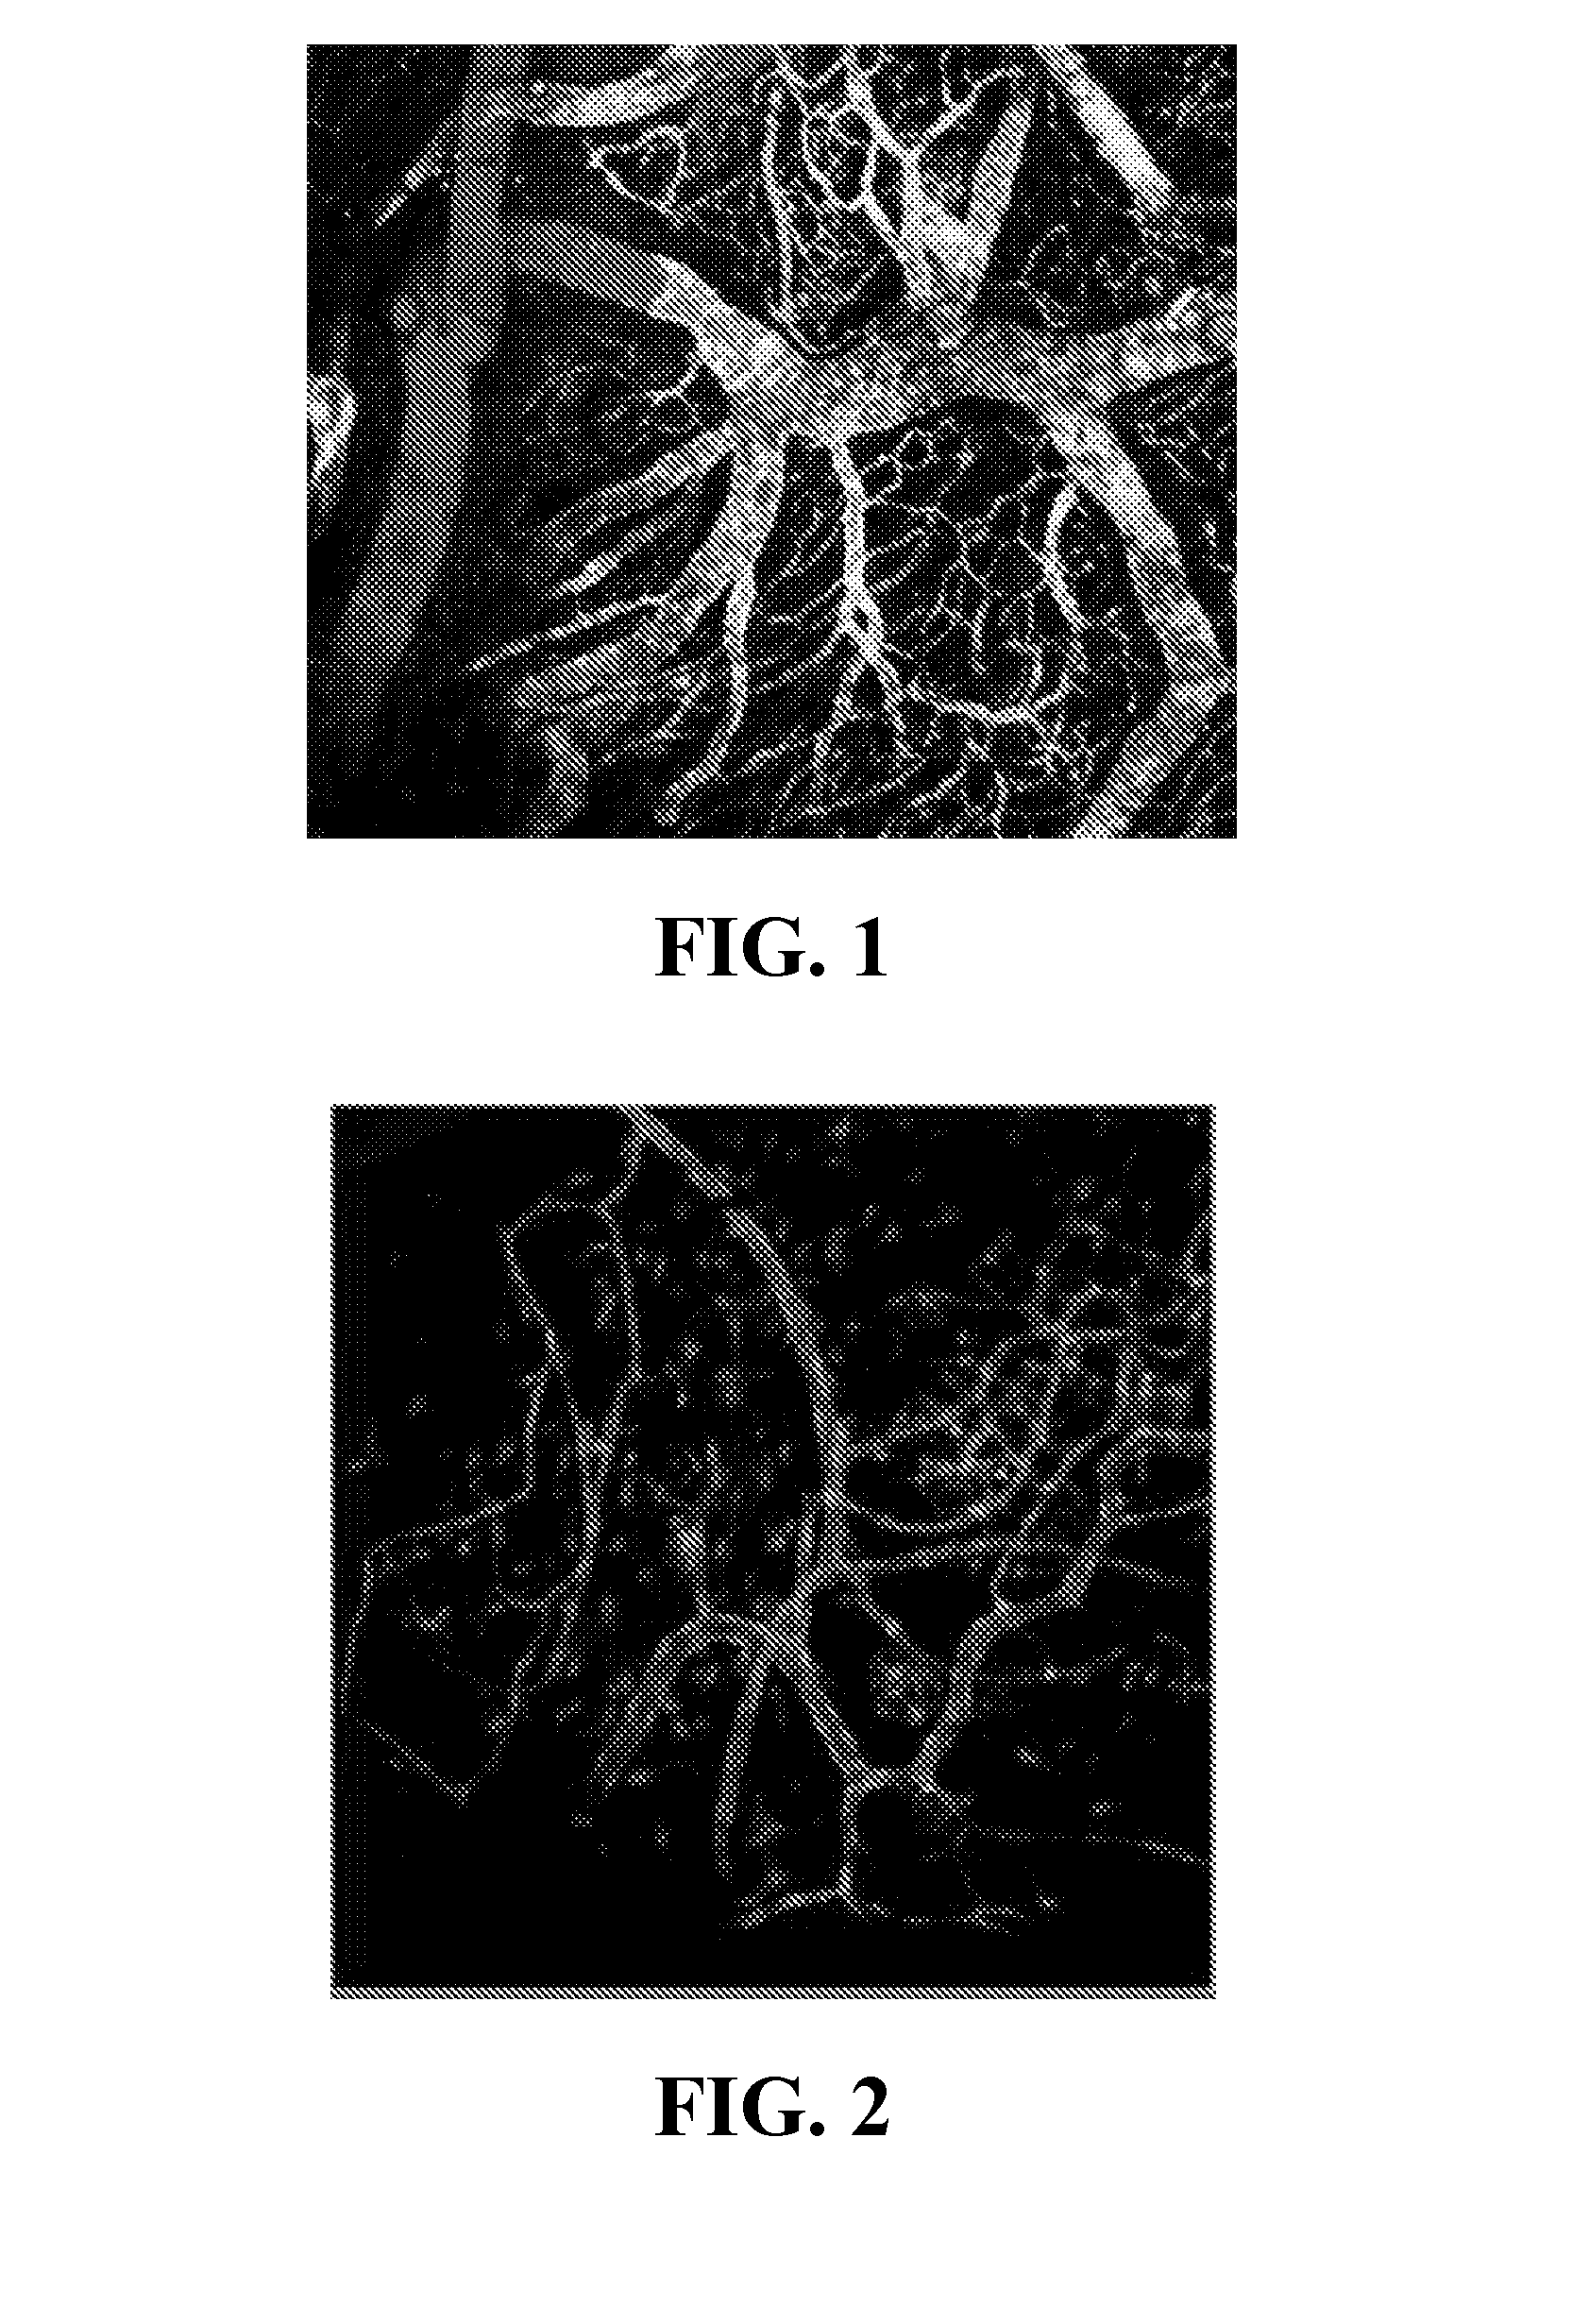 Cell systems and methods for delivering disease-specific therapies